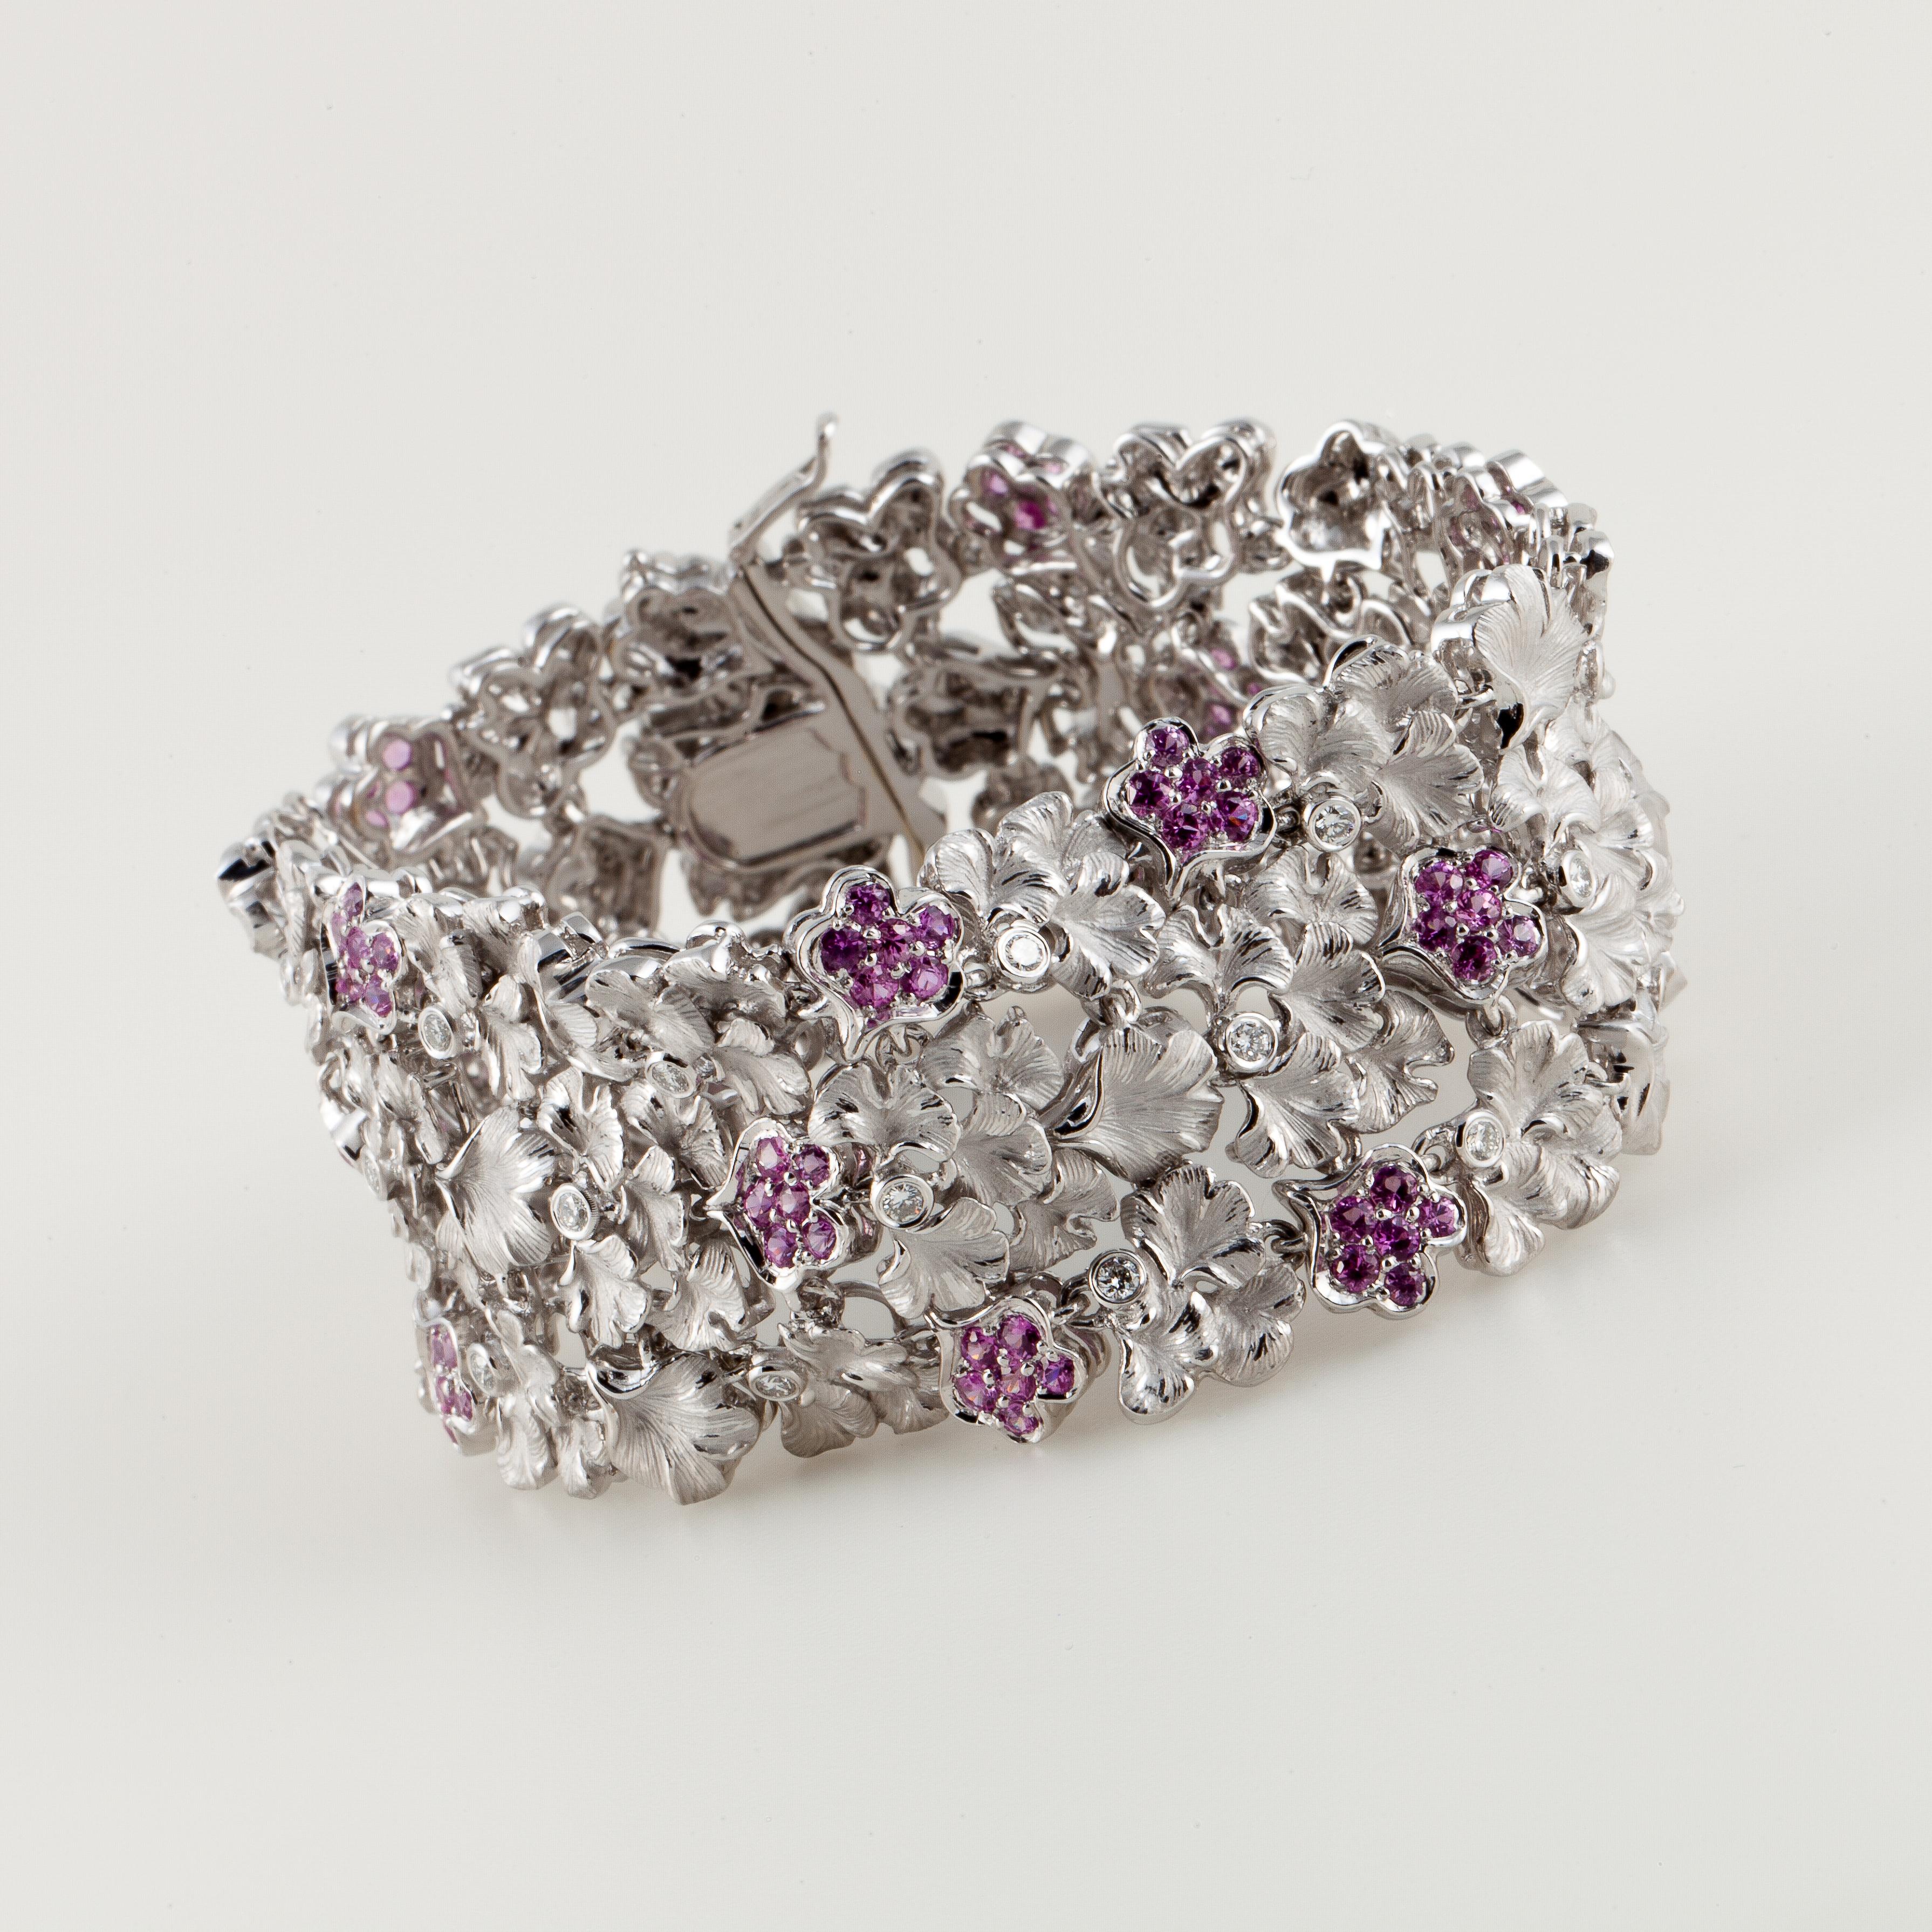 Carrera y Carrera floral bracelet in 18K white gold with pink sapphire and diamond accents.  The sapphires total 3.85 carats and 18 round diamonds that total .60 carats; G-H color and VVS clarity.  The bracelet measures 7 1/4 inches long and 1 1/16